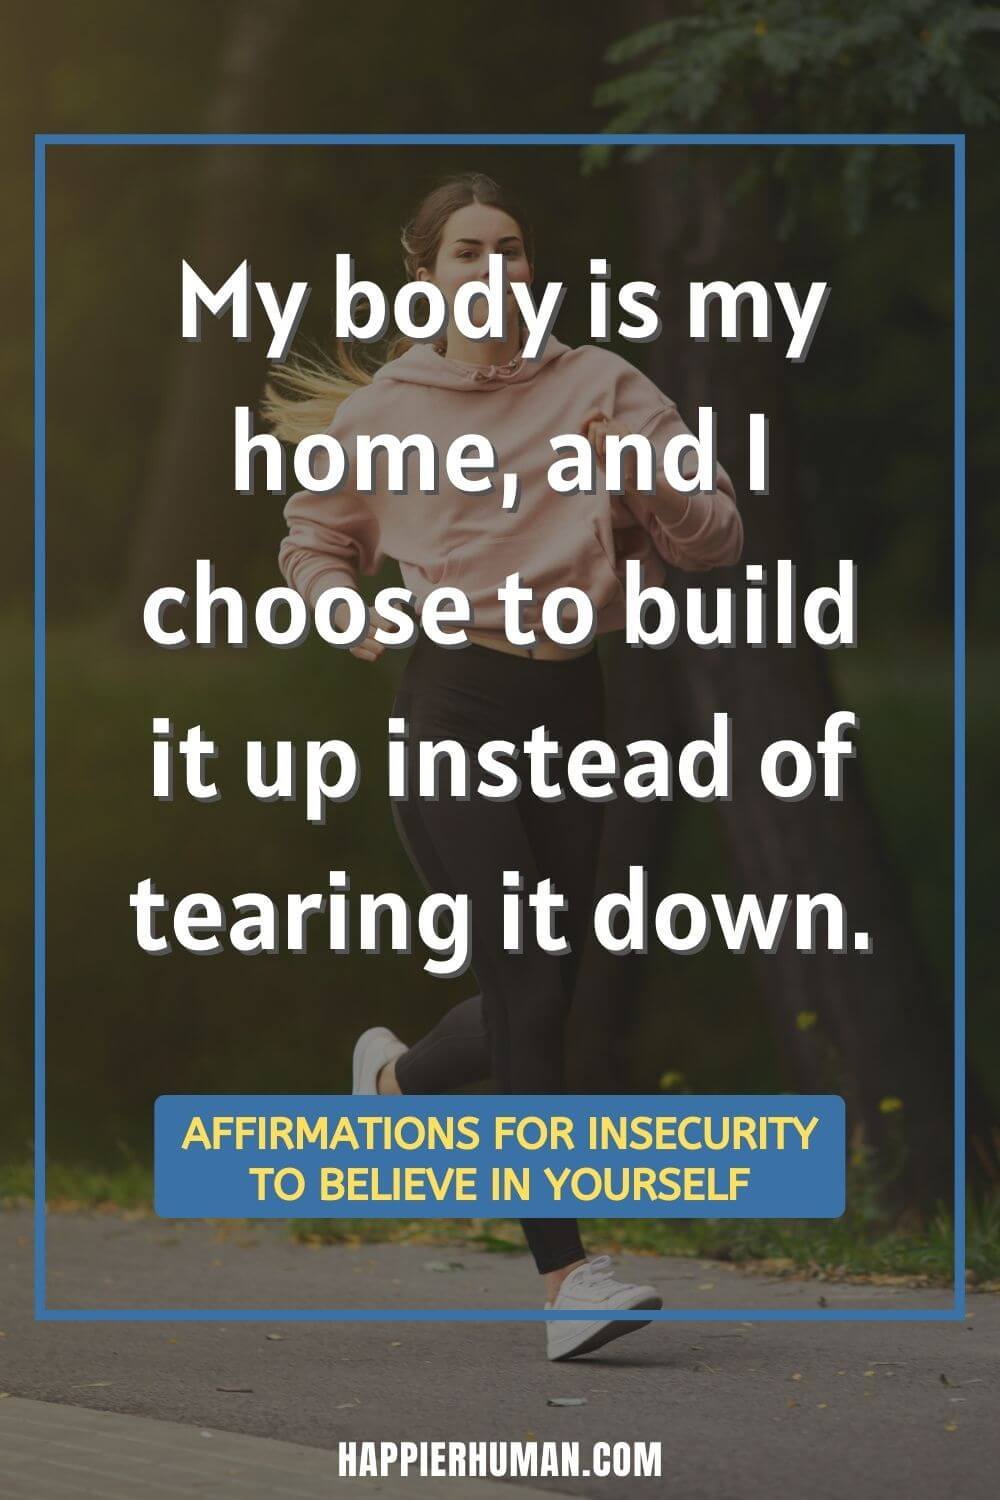 Affirmations for Insecurity - My body is my home, and I choose to build it up instead of tearing it down. | affirmations for insecurity | affirmations for self esteem | positive affirmations for relationship problems